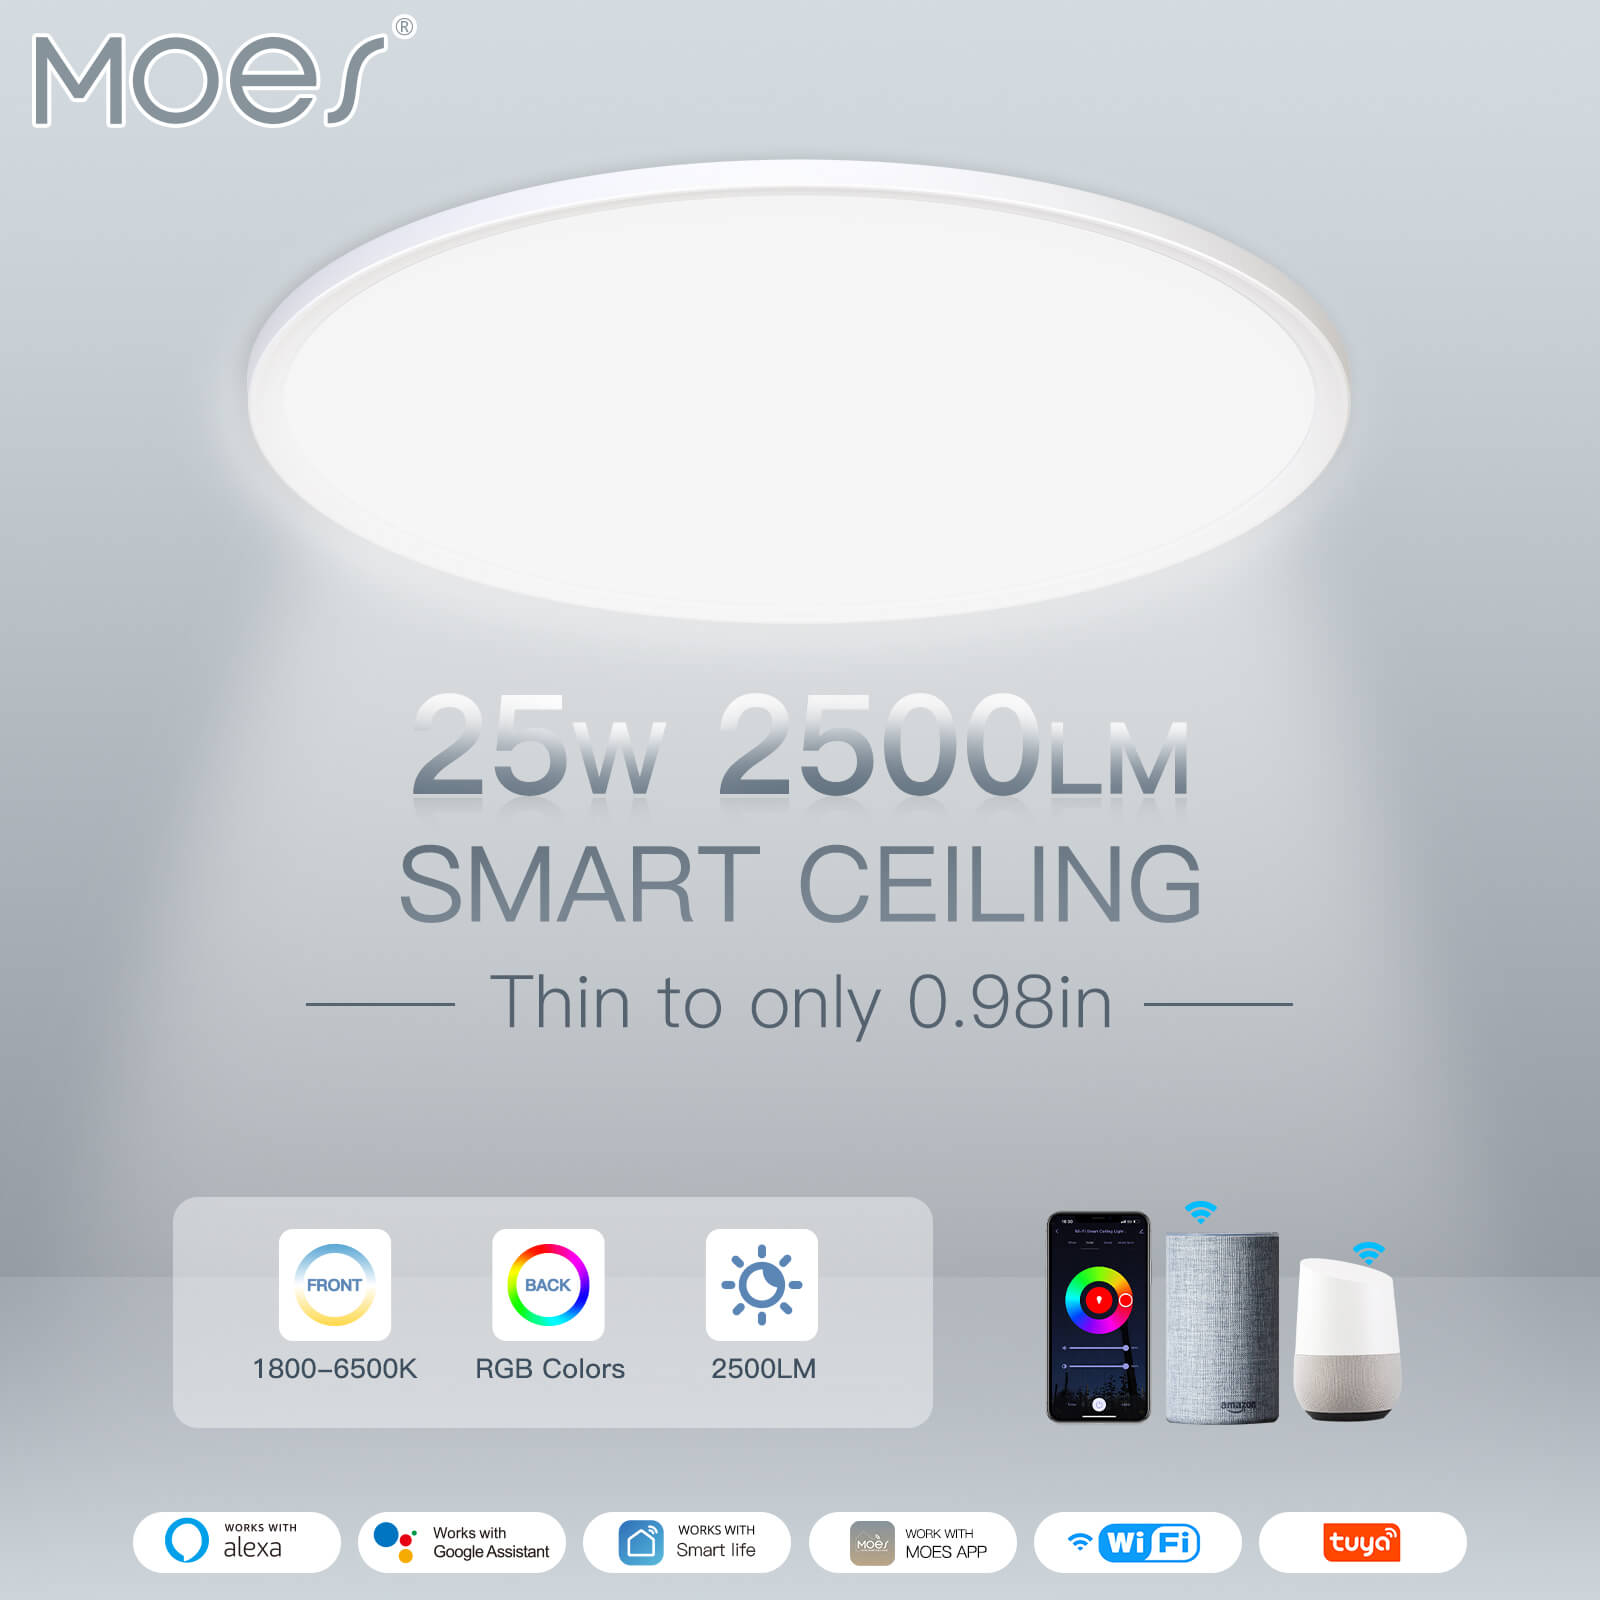 SMART CEILING 25W - 2500LM - MOES